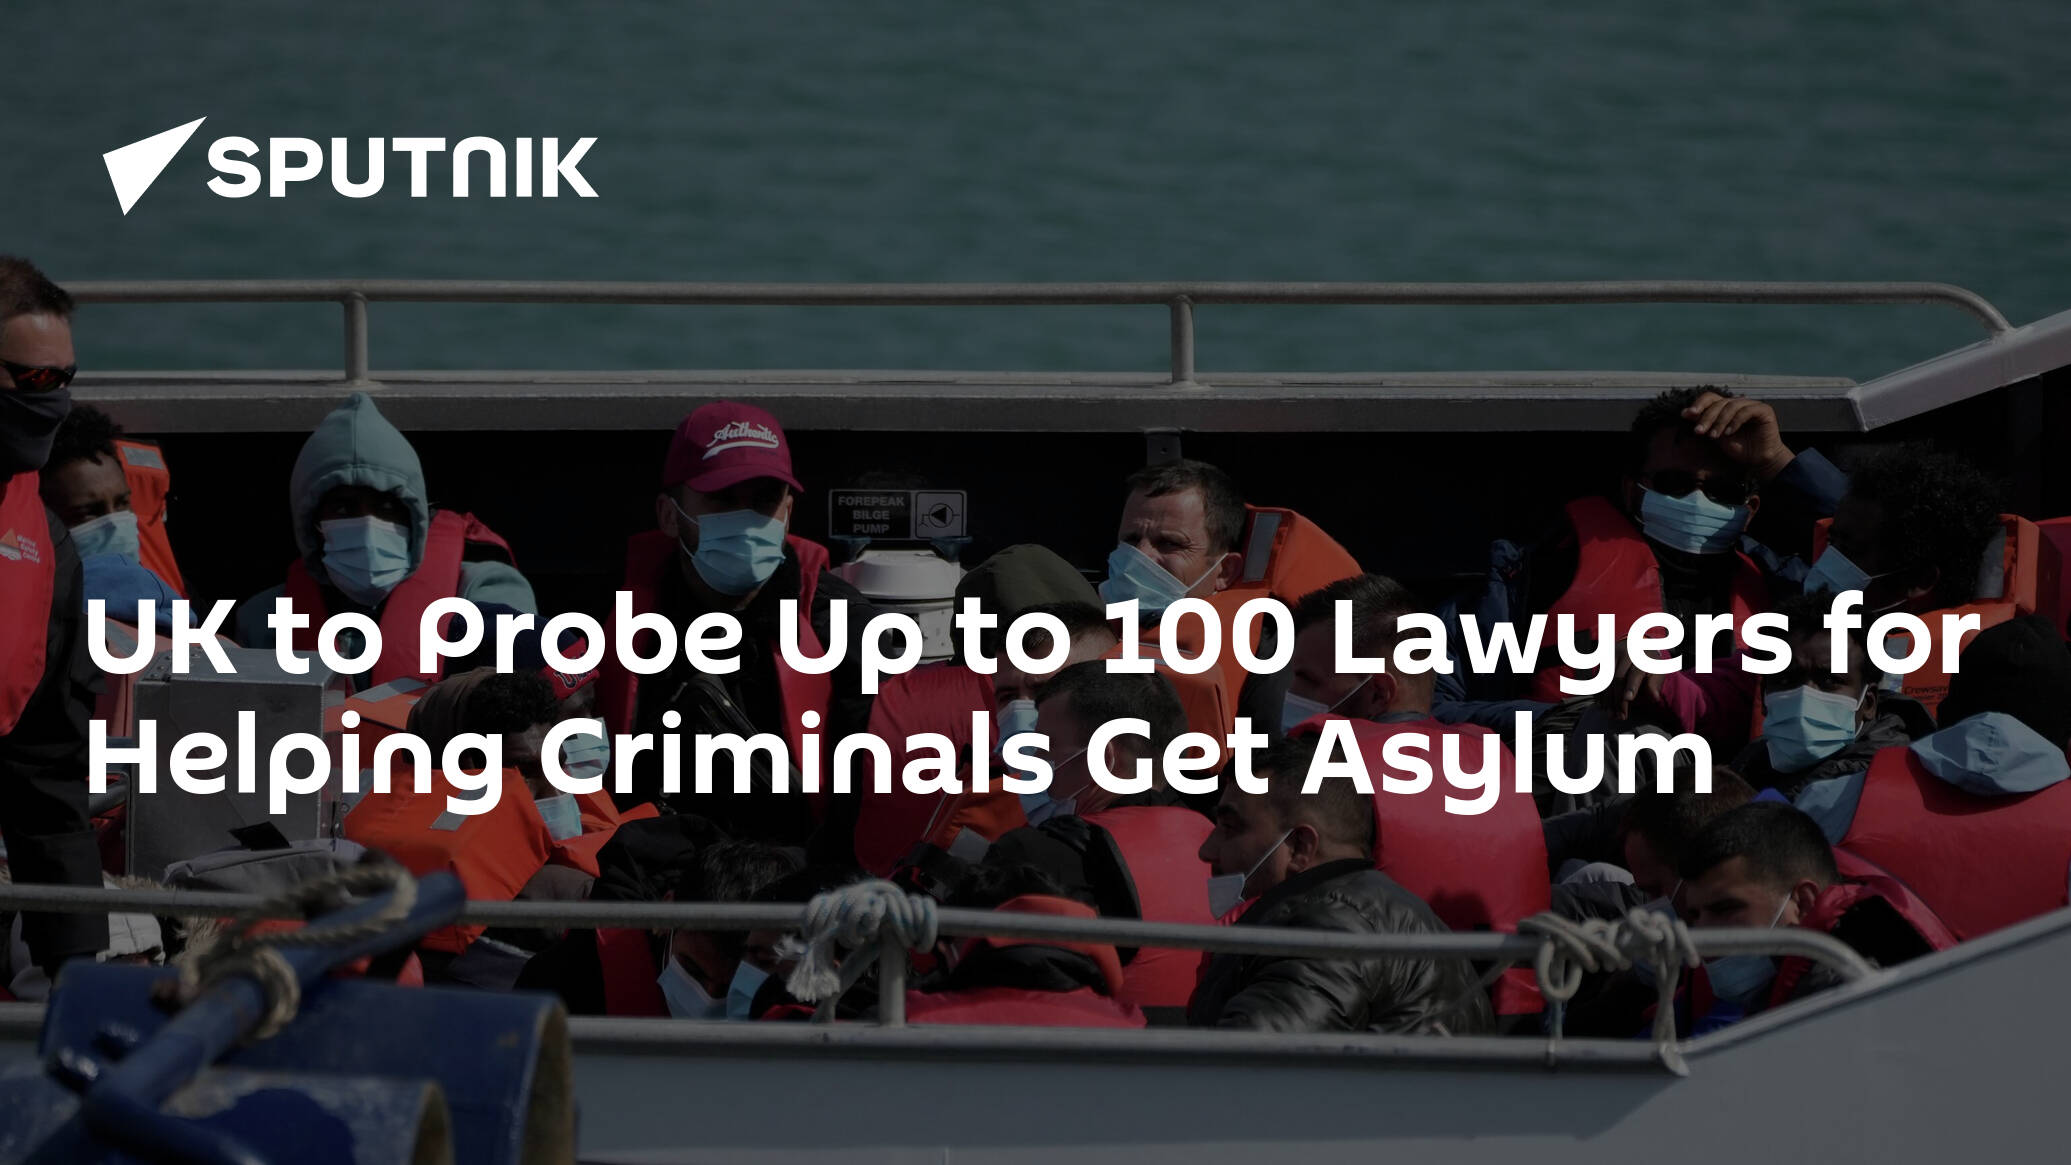 UK to Probe Up to 100 Lawyers for Helping Criminals Get Asylum